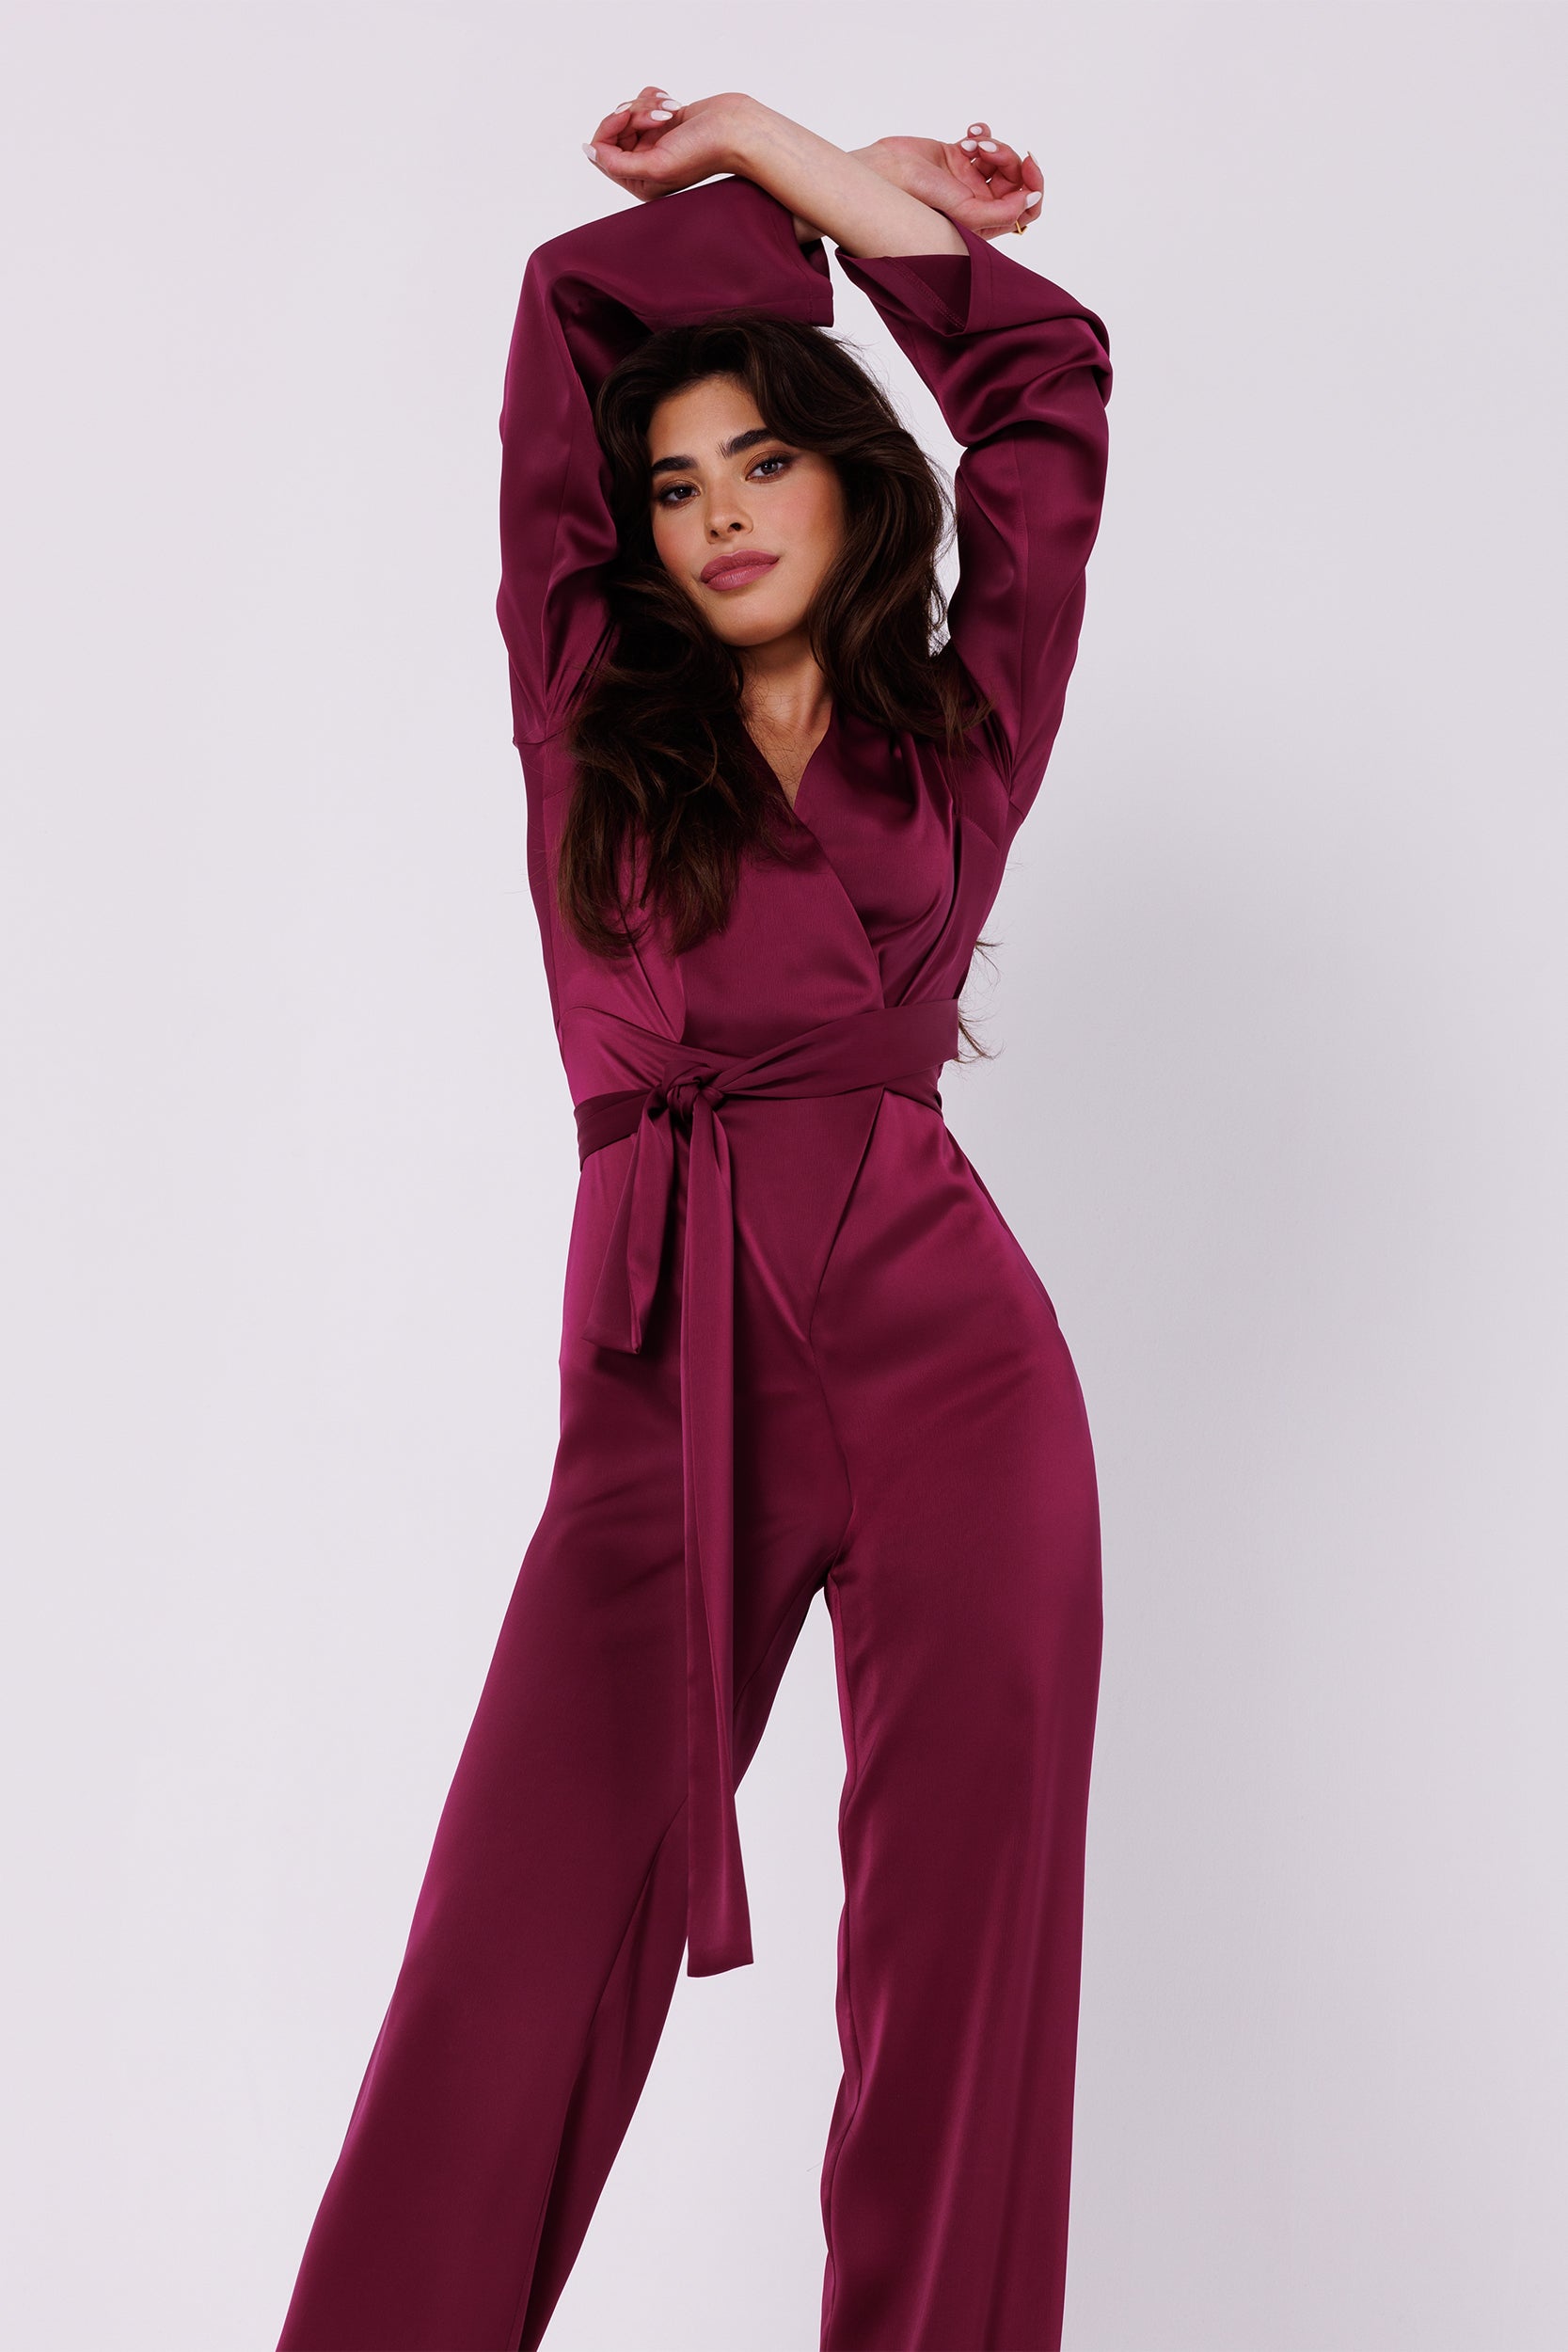 Long Sleeve Wine Red Satin Jumpsuit | Strictly In | Make a statement at your next event with our Long Sleeve Satin Jumpsuit. Crafted from luxurious satin, it features a V-neck, long sleeves, and a tied waist for a glamorous yet comfortable look. Perfect for the party season.